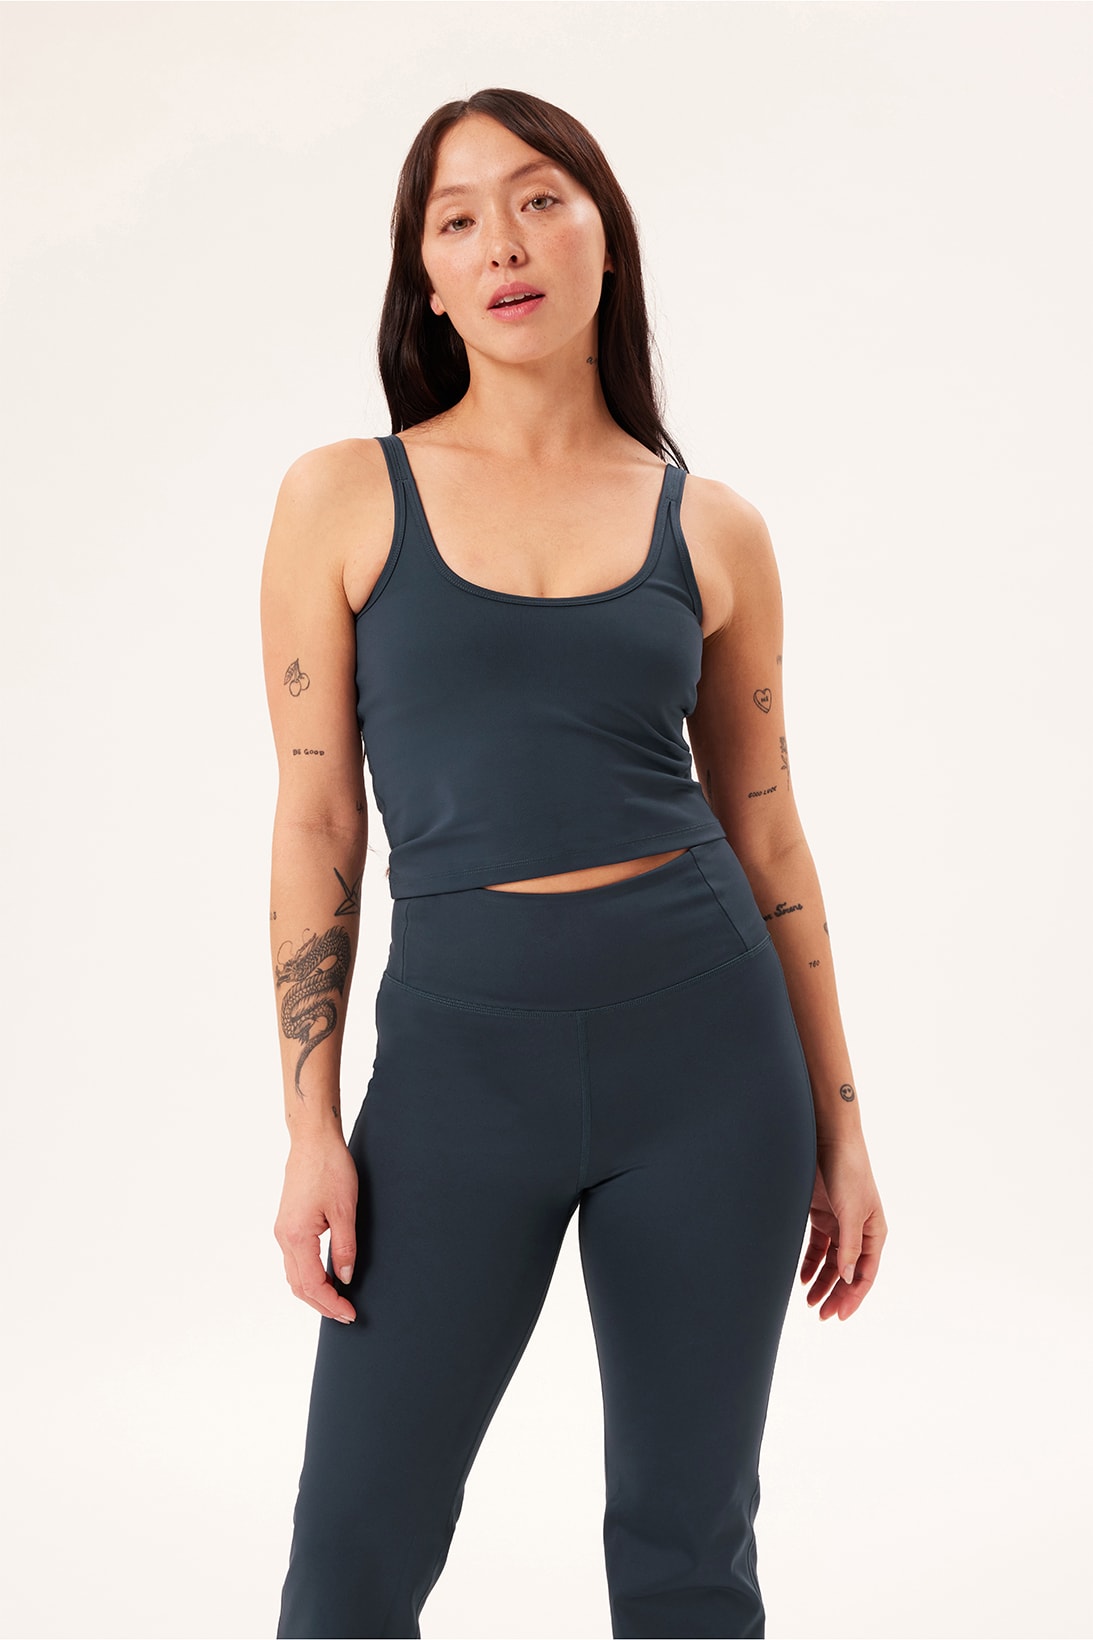 Girlfriend Collective Spring Limited New Compressive Collections Activewear Sportswear